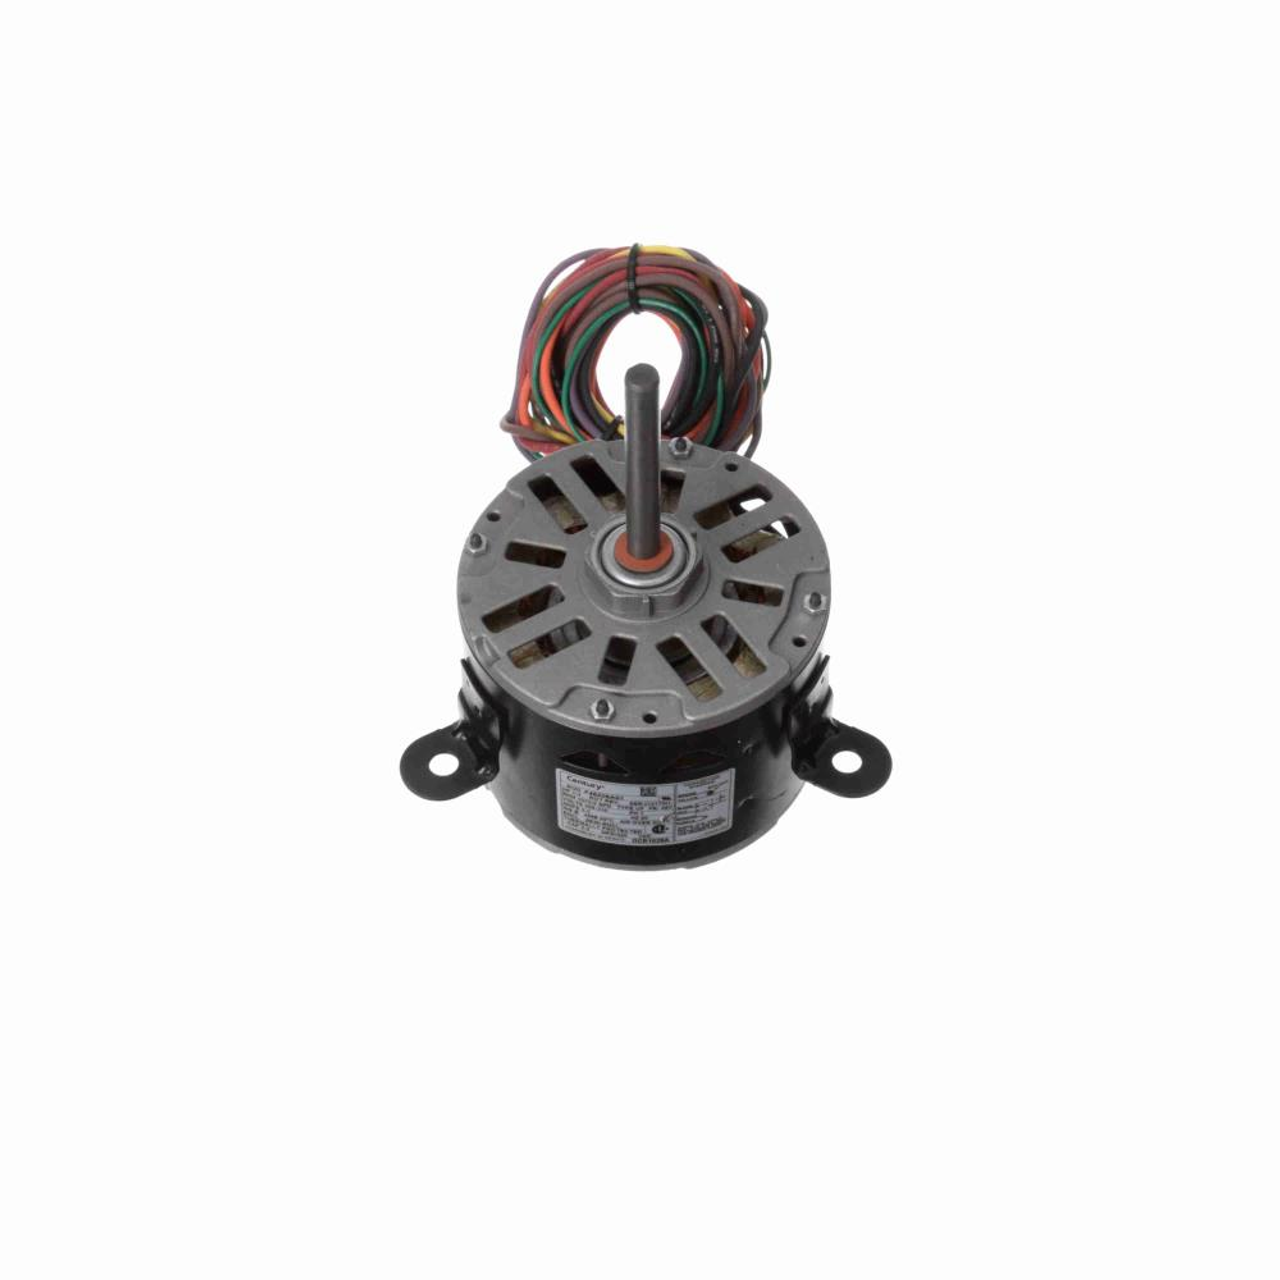 OCB1026A Century, Carrier Electric Motor 1/4 hp 1075 RPM 2.2 amps 208-230V